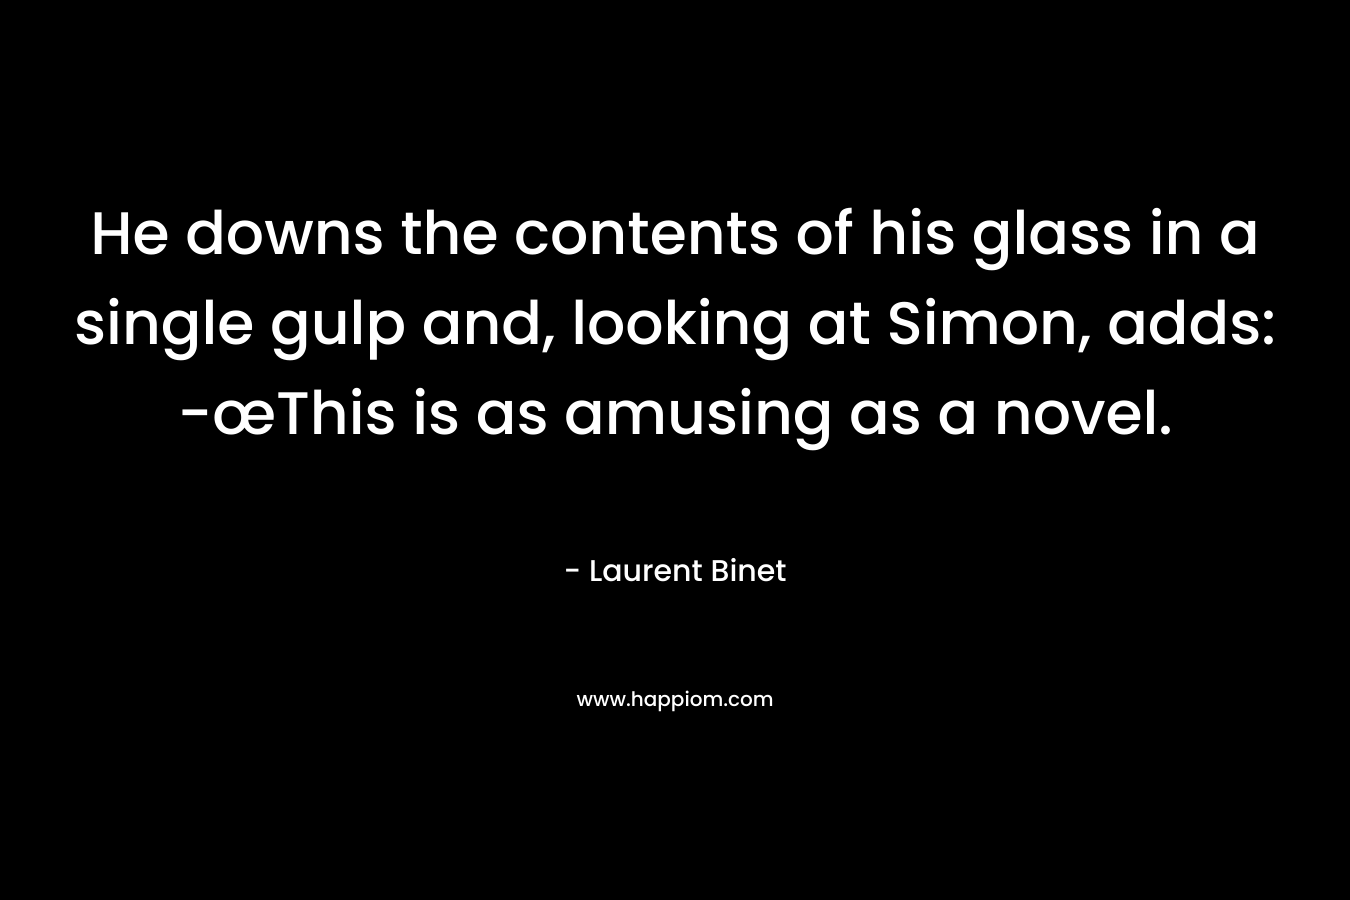 He downs the contents of his glass in a single gulp and, looking at Simon, adds: -œThis is as amusing as a novel.